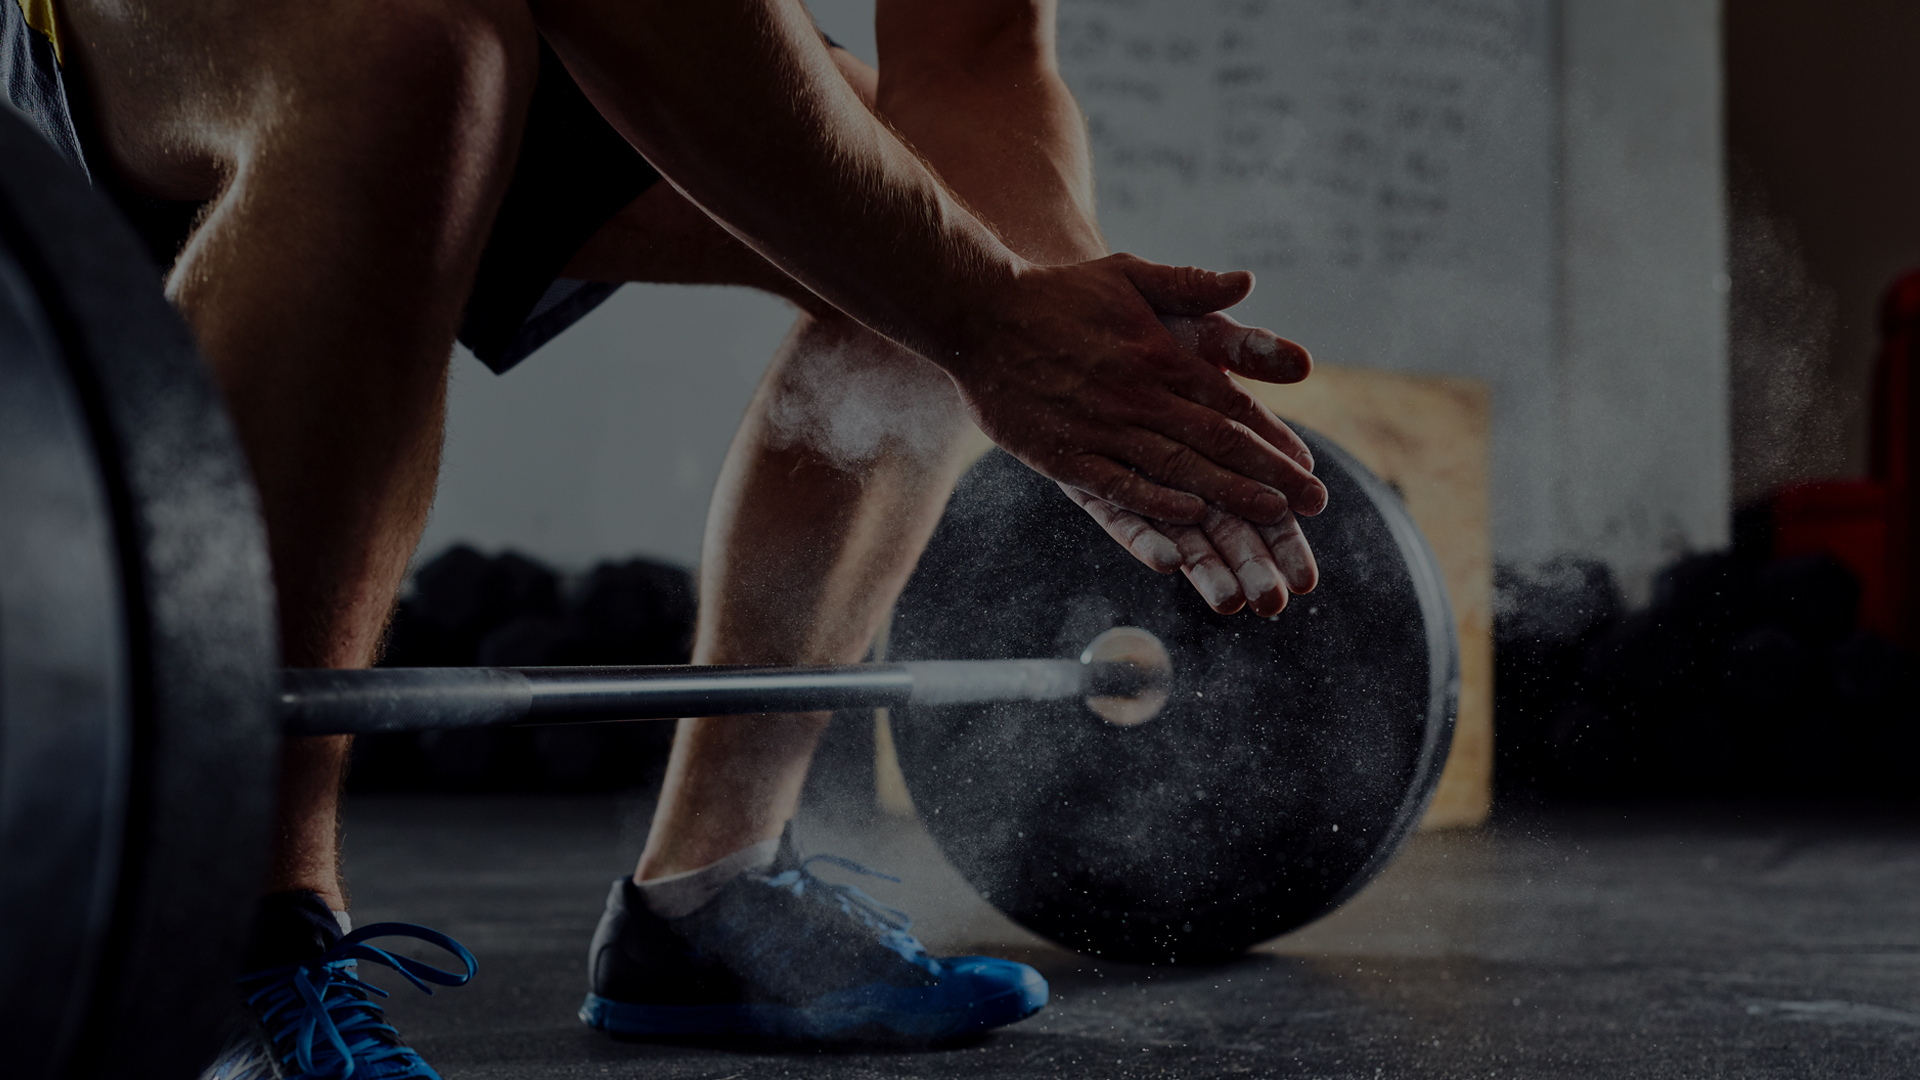 CrossFit Terminology: What Are they Talking About? - IntervalPlus